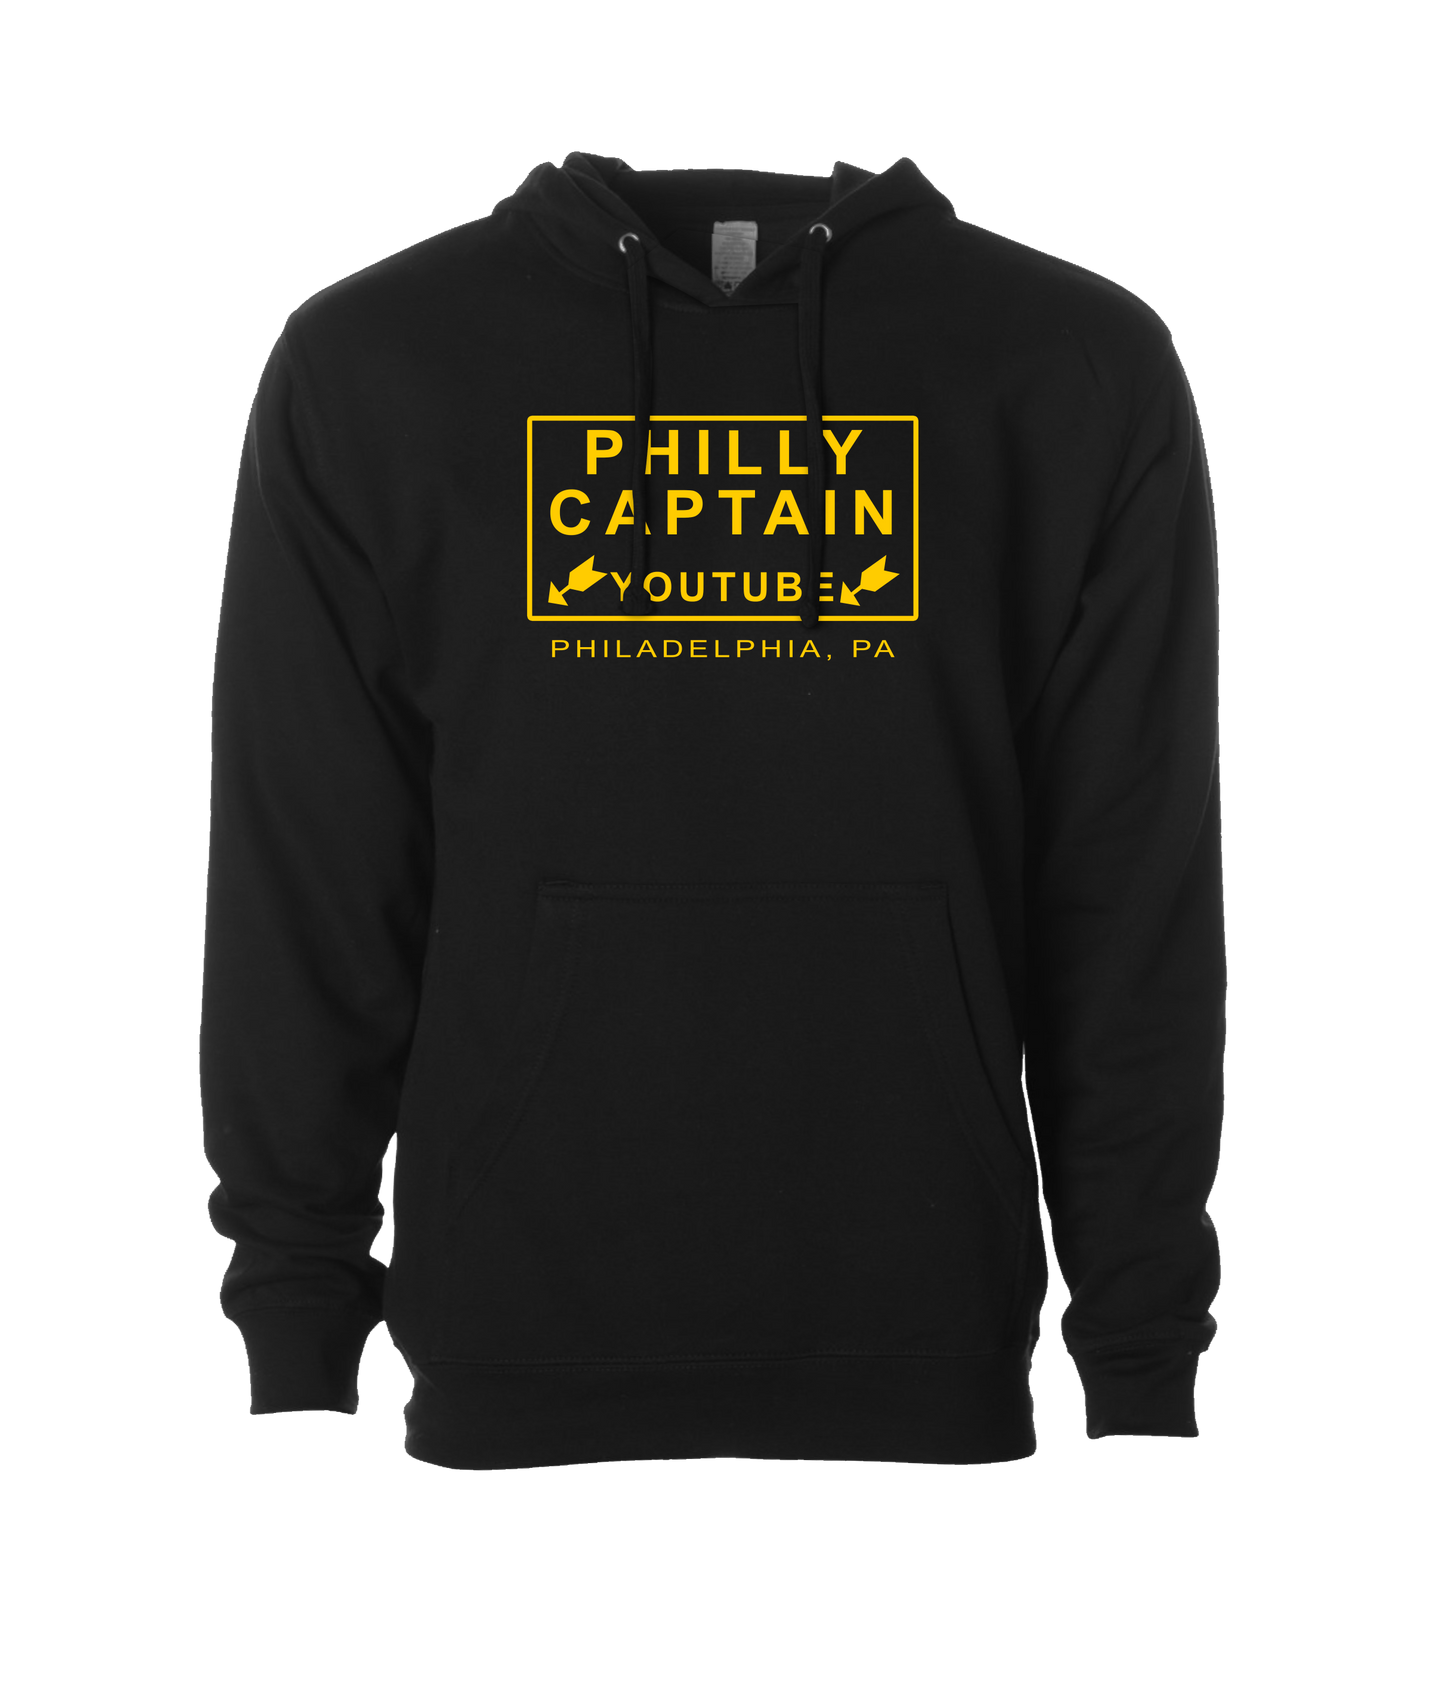 The Philly Captain's Merch is Fire - YouTube - Black Hoodie